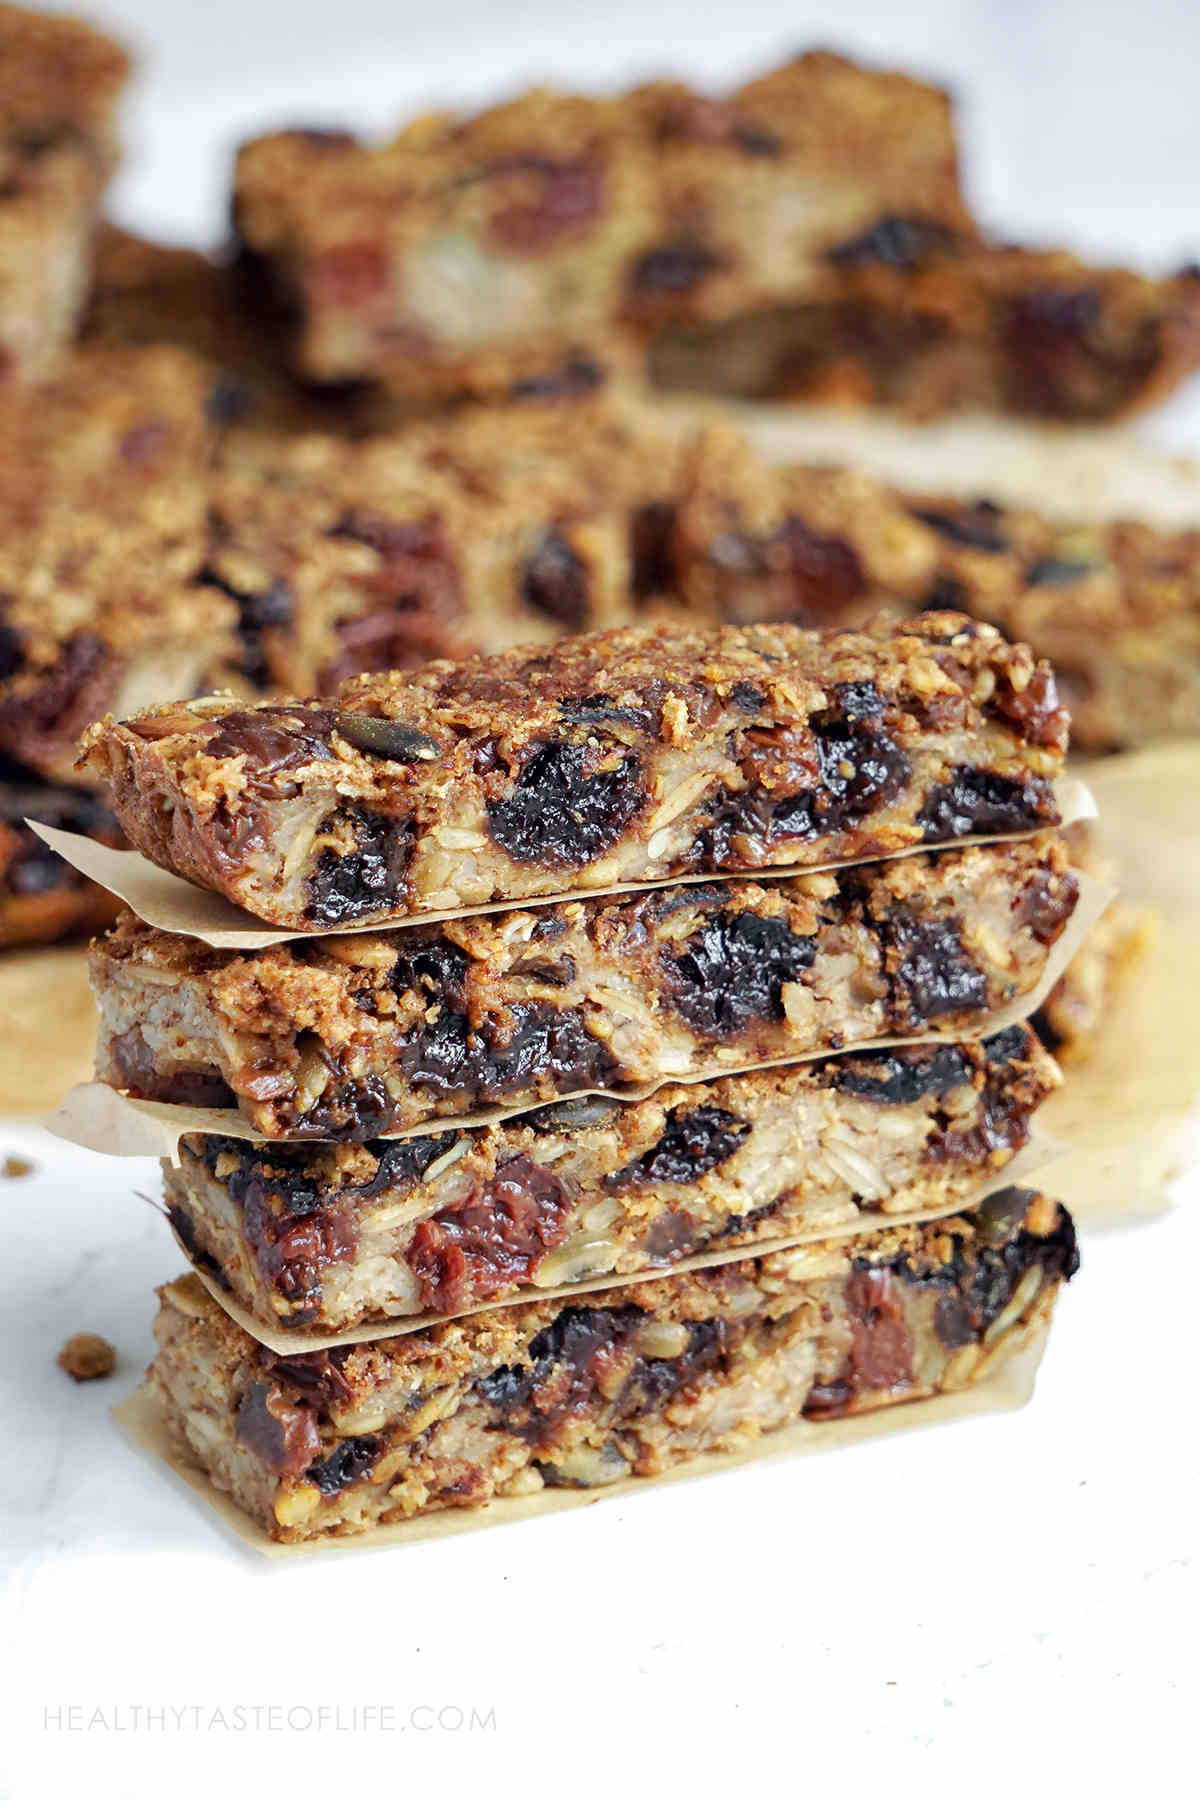 oatmeal bars with dried fruits for kids